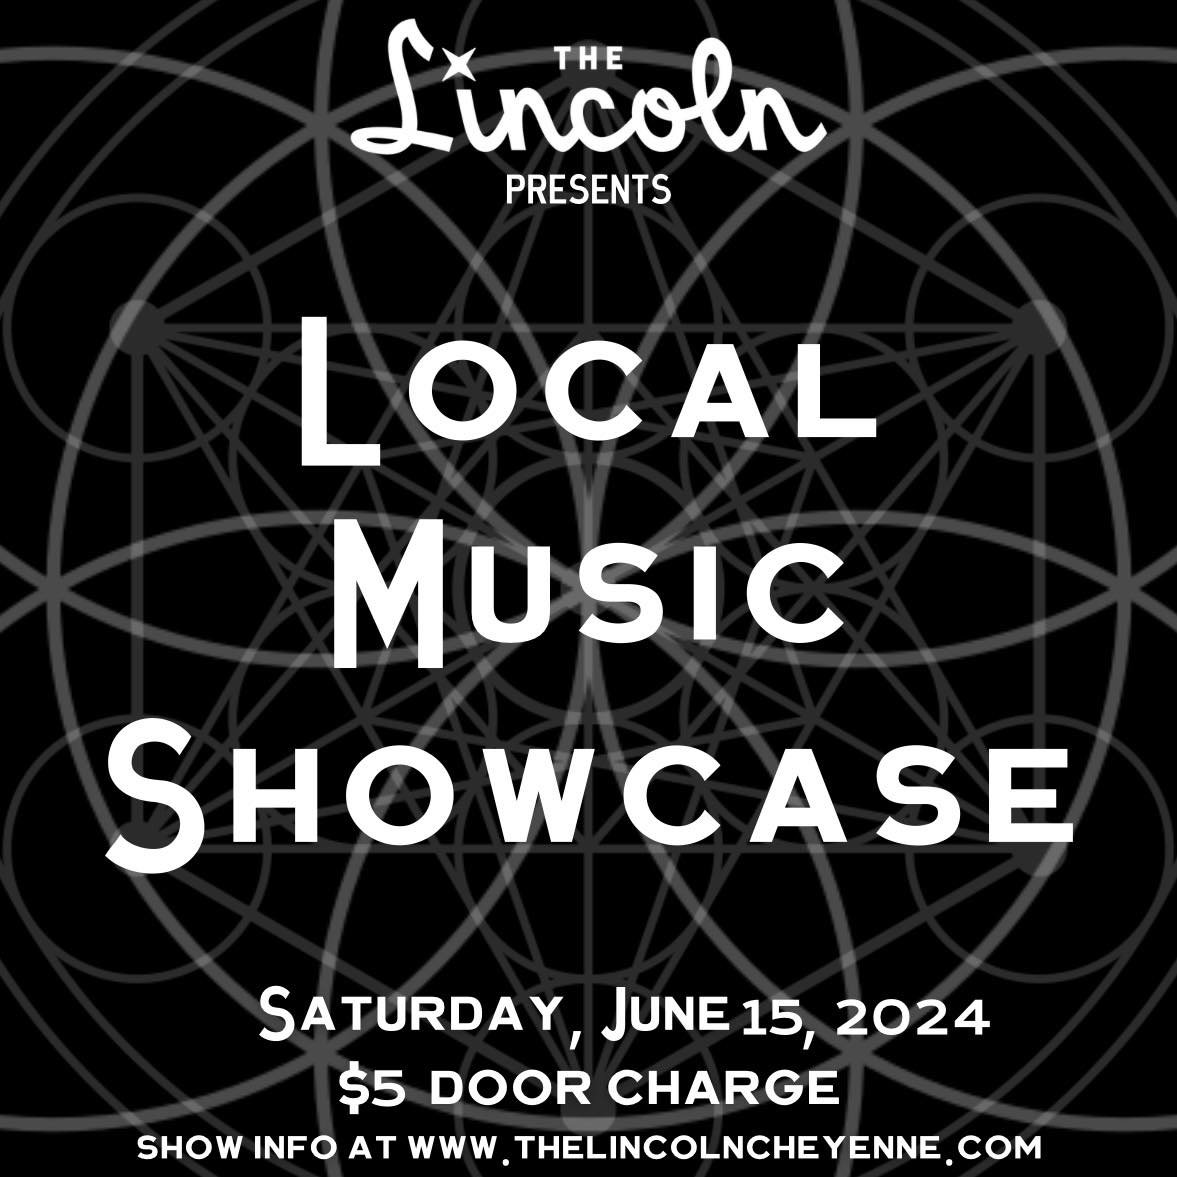 Registration for our Band Local Music Showcase is now open!🤩 This series is to feature local musicians of all genres with the opportunity to play on our state of the art stage with our professional sound and lighting systems. Registration is open to